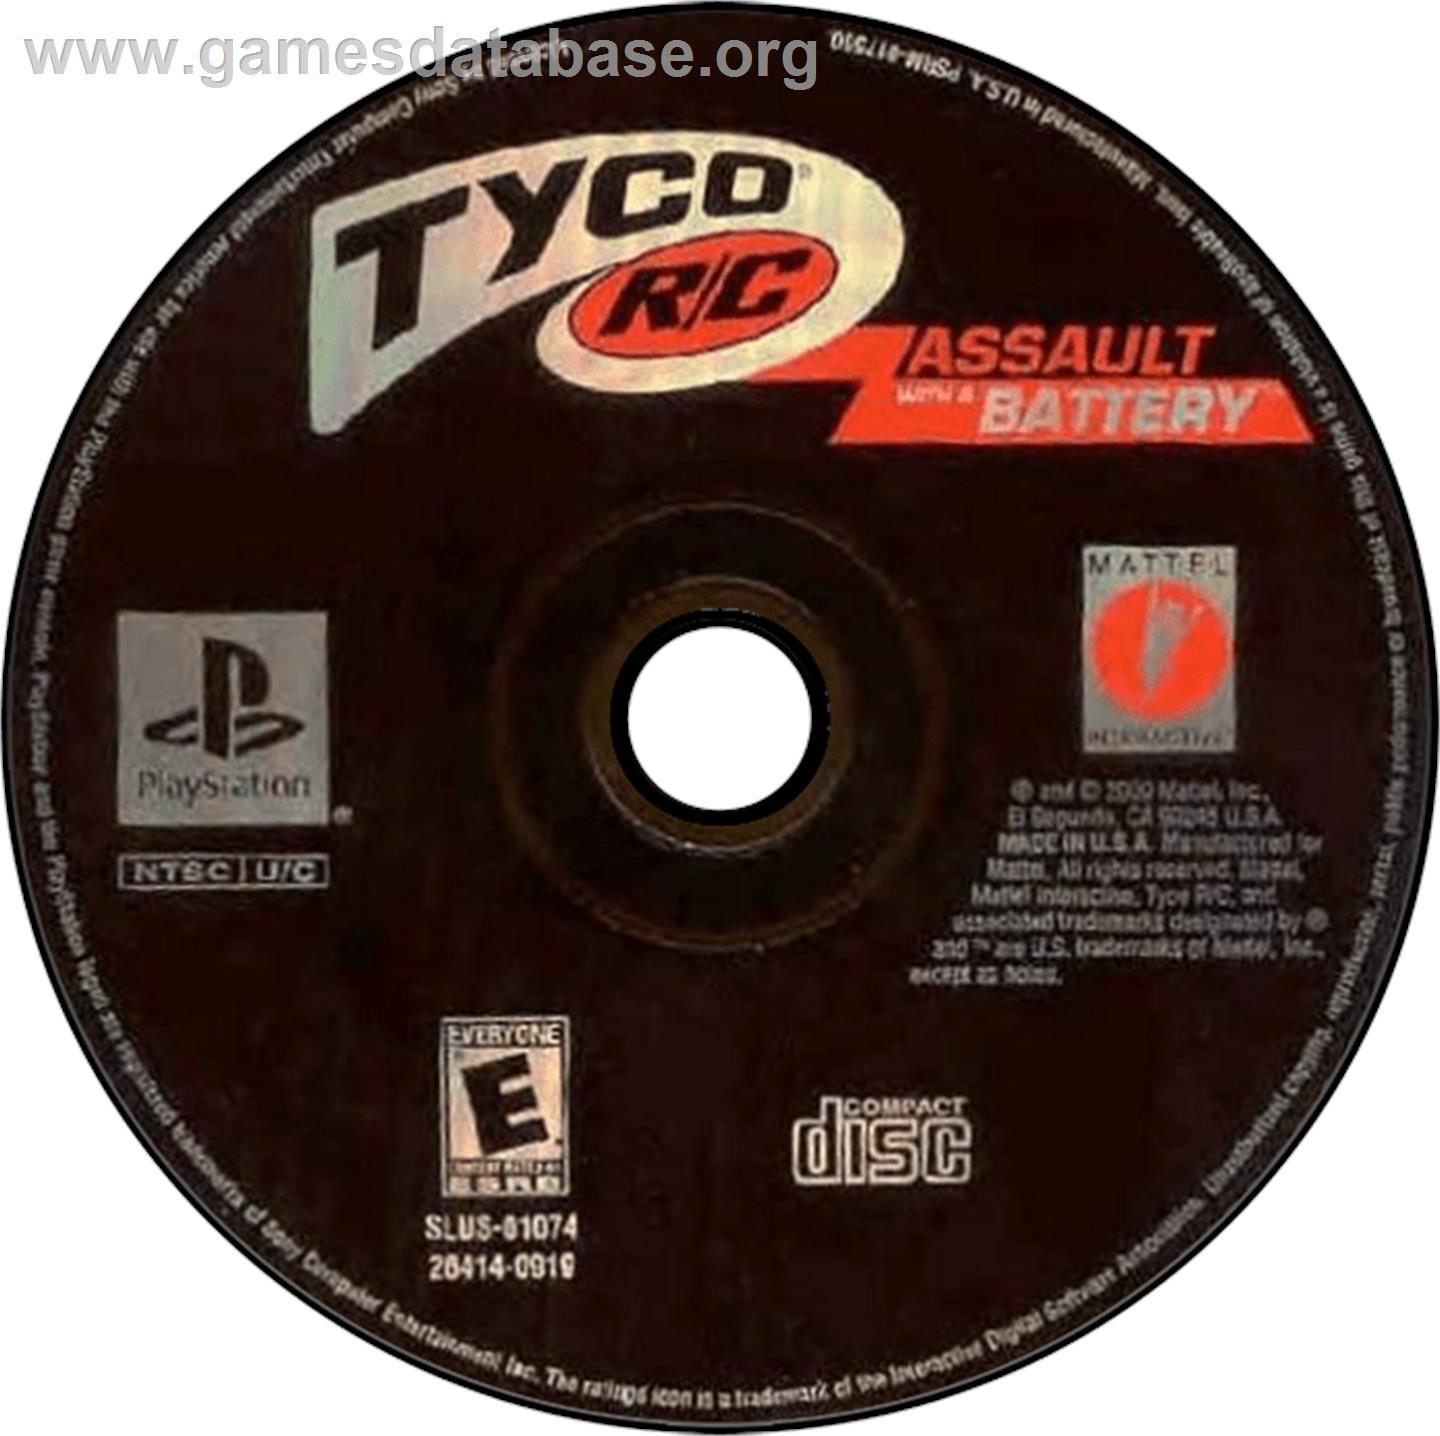 Tyco R/C: Assault with a Battery - Sony Playstation - Artwork - Disc